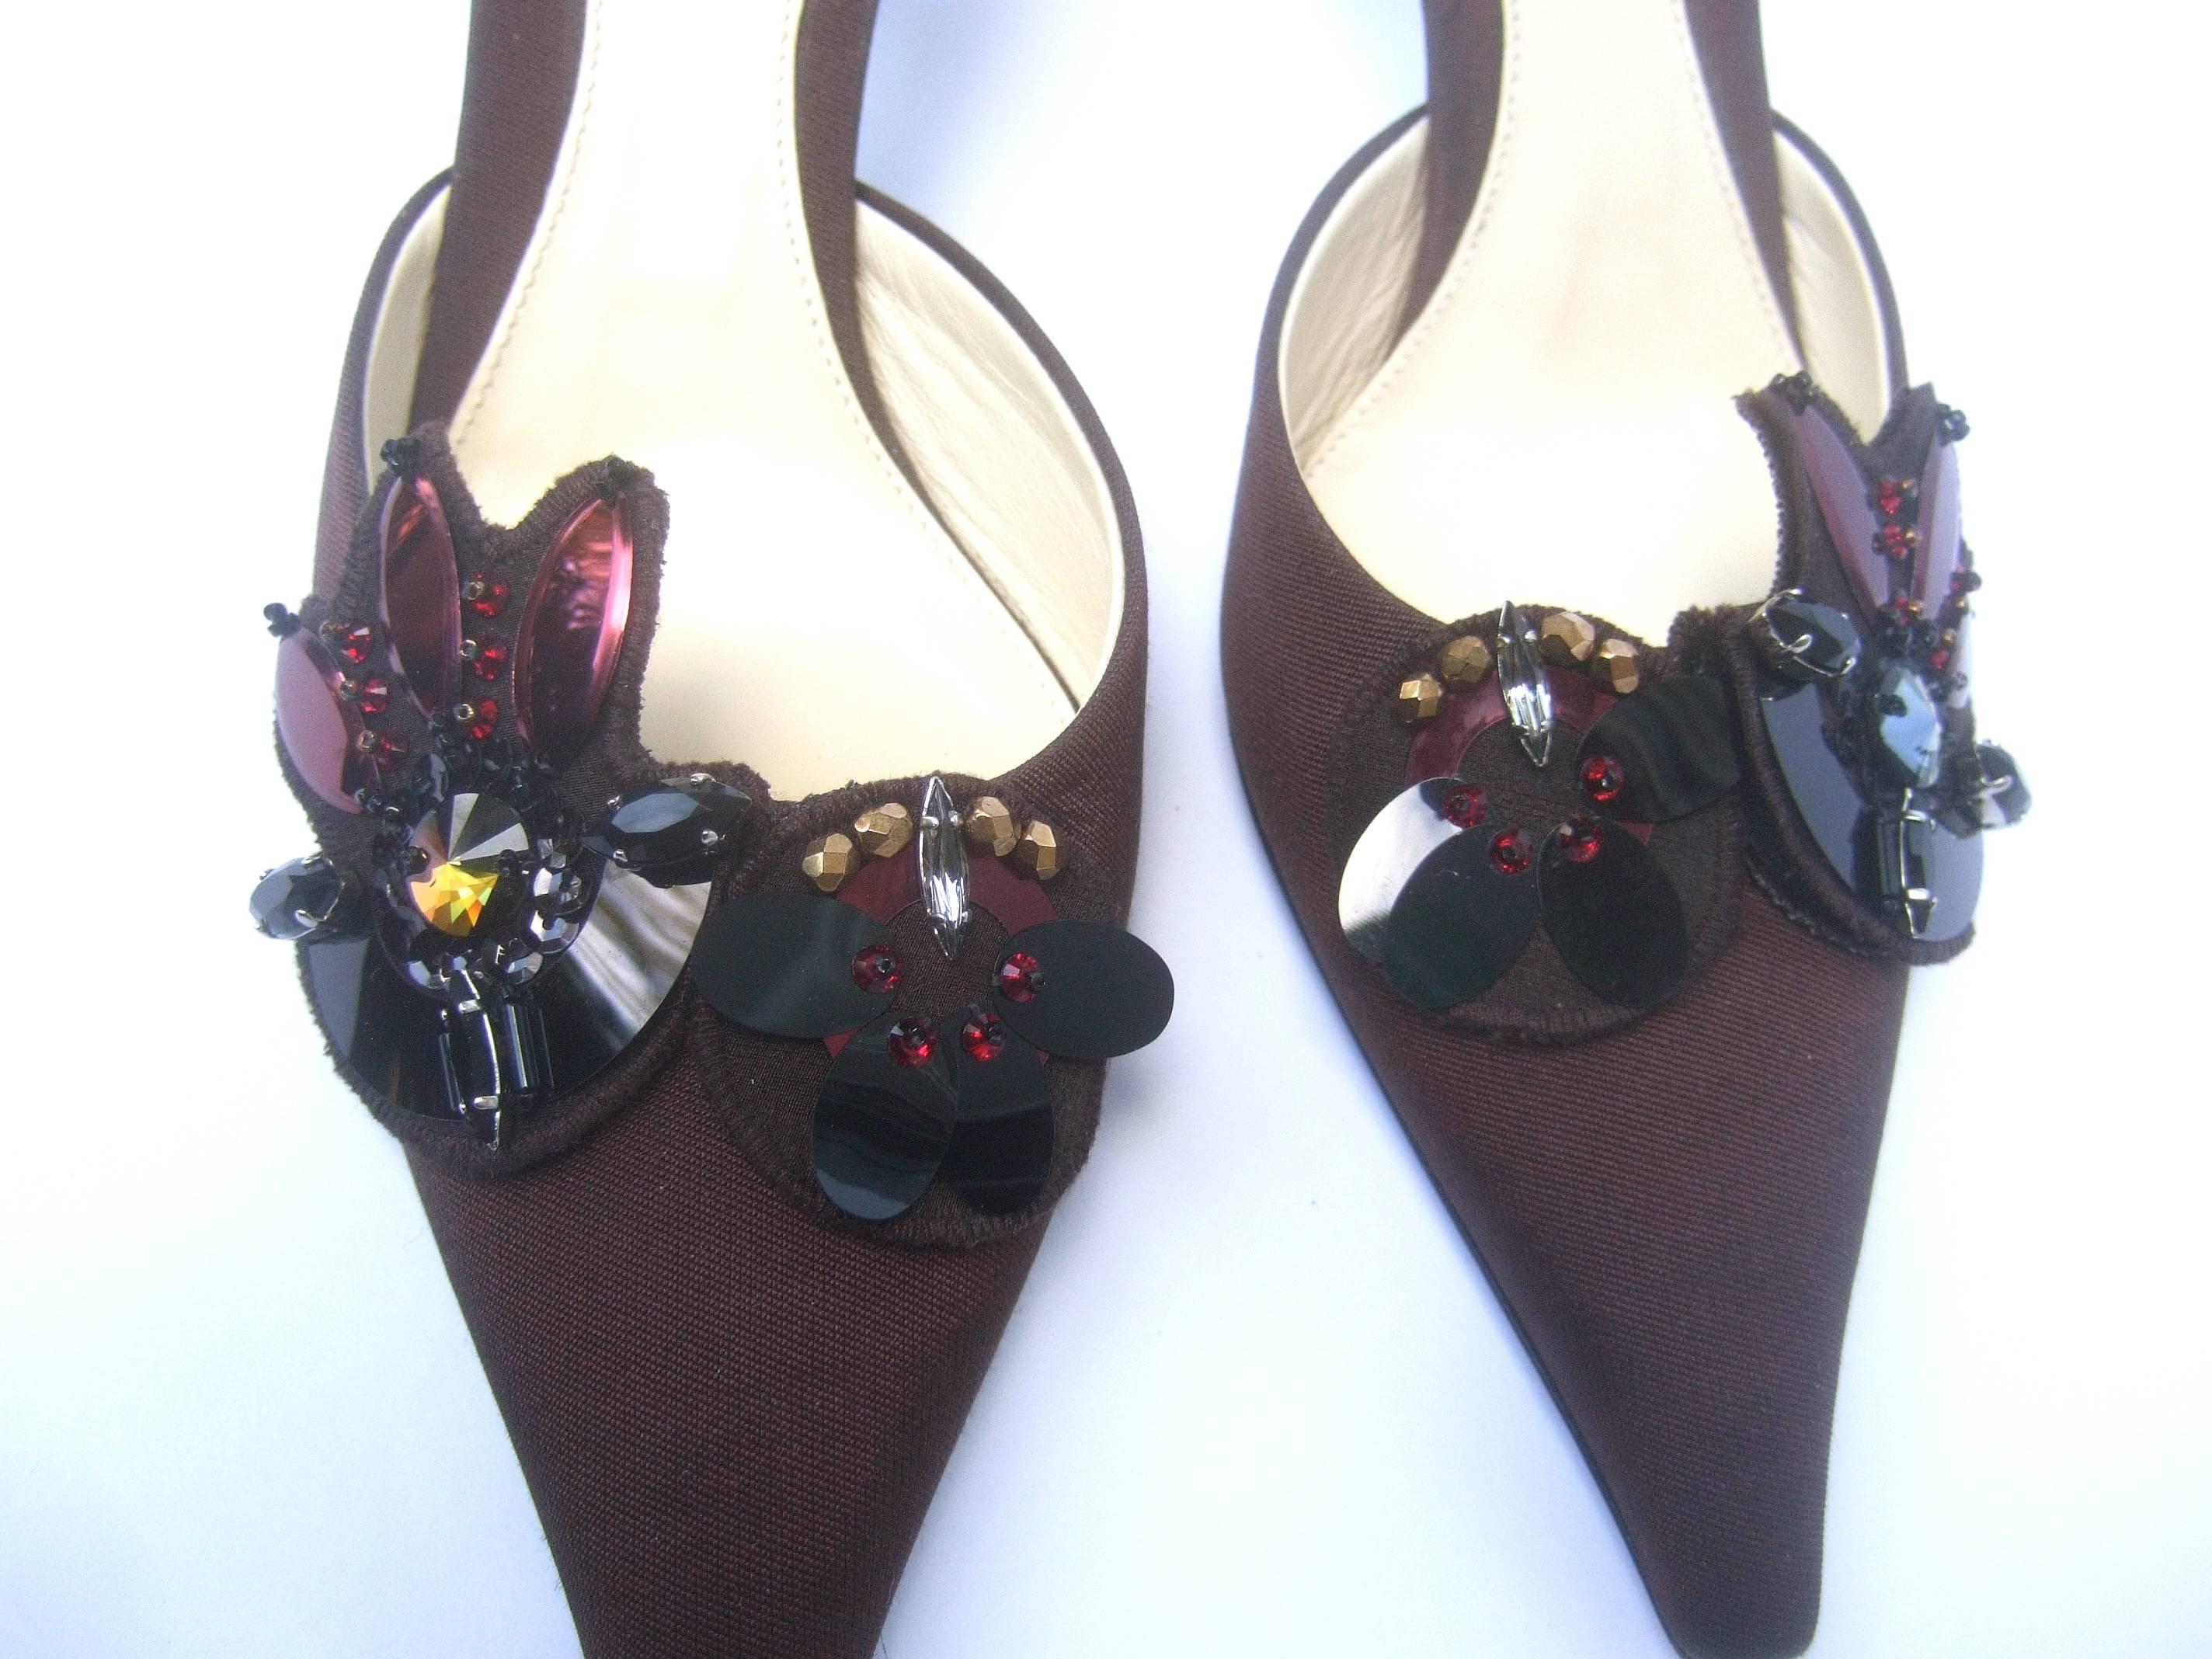 Prada Italy Chocolate Brown Jeweled Satin Mules in Box Size 37  In Good Condition For Sale In University City, MO